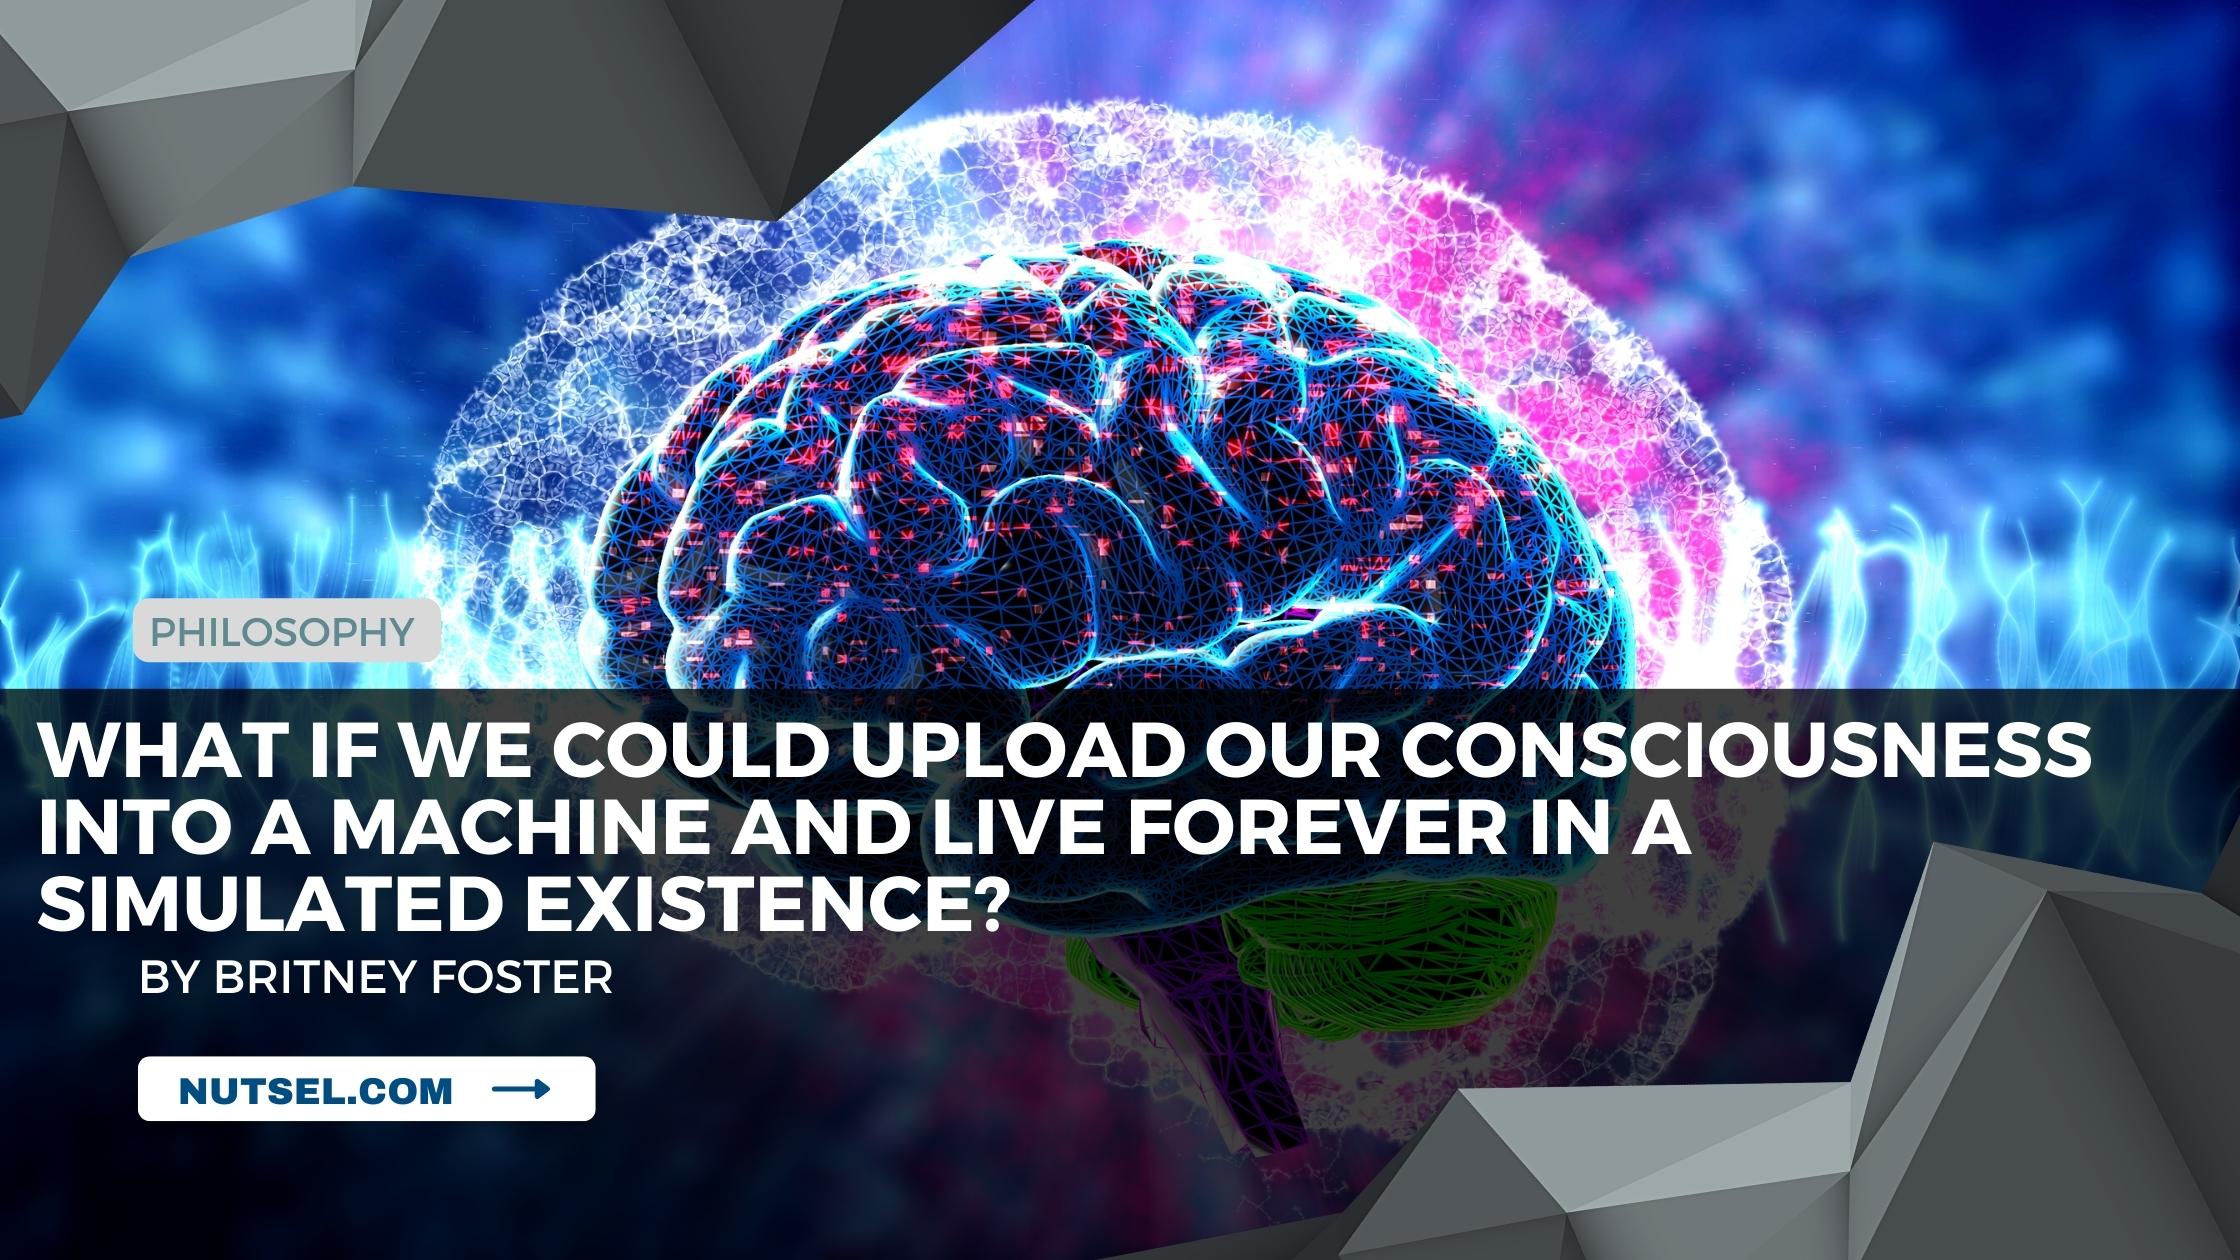 What if we could upload our consciousness into a machine and live forever in a simulated existence?